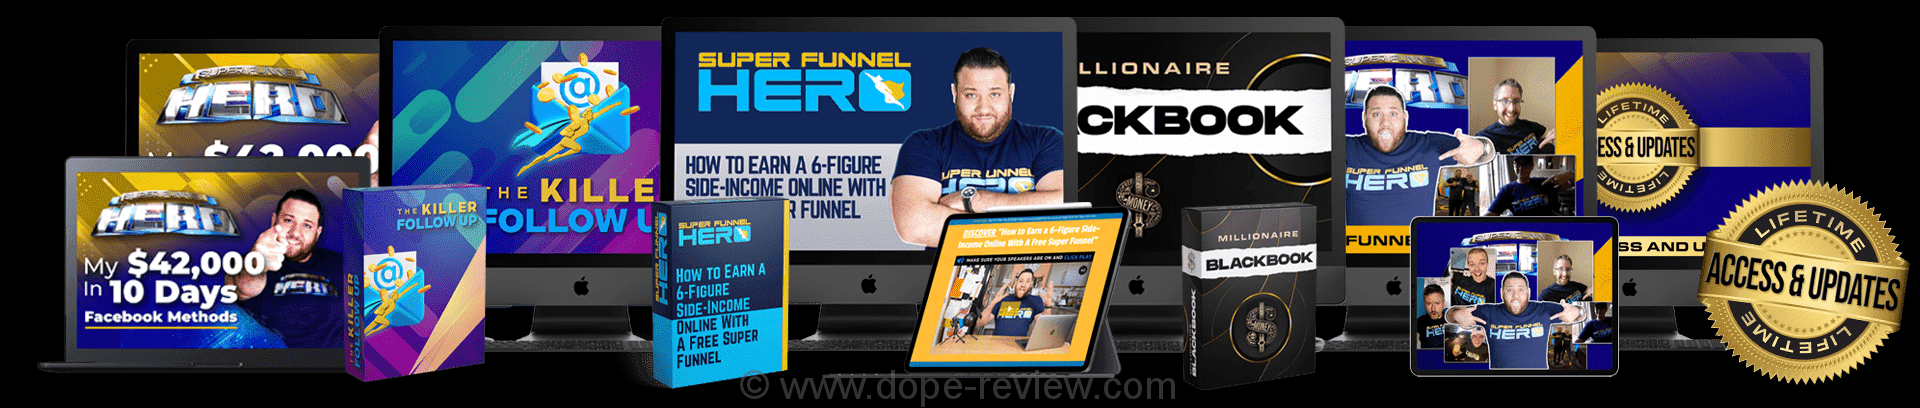 Super Funnel Hero Review